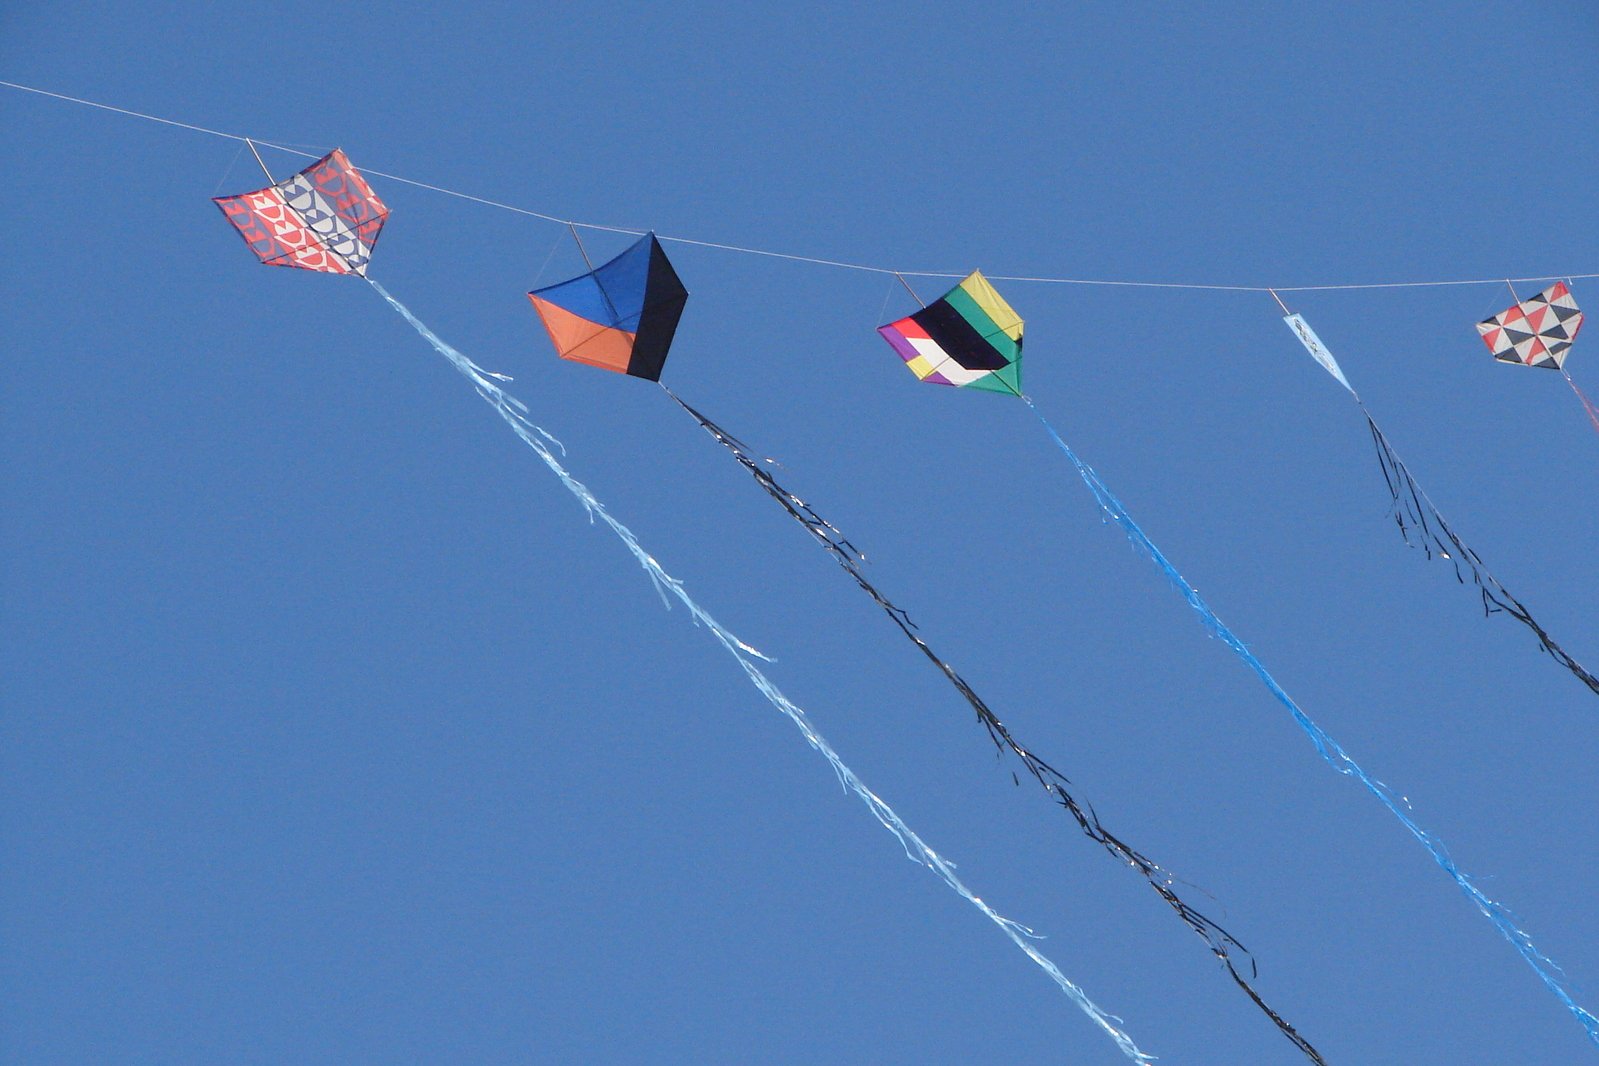 colorful kites flying on a clear day with a blue sky